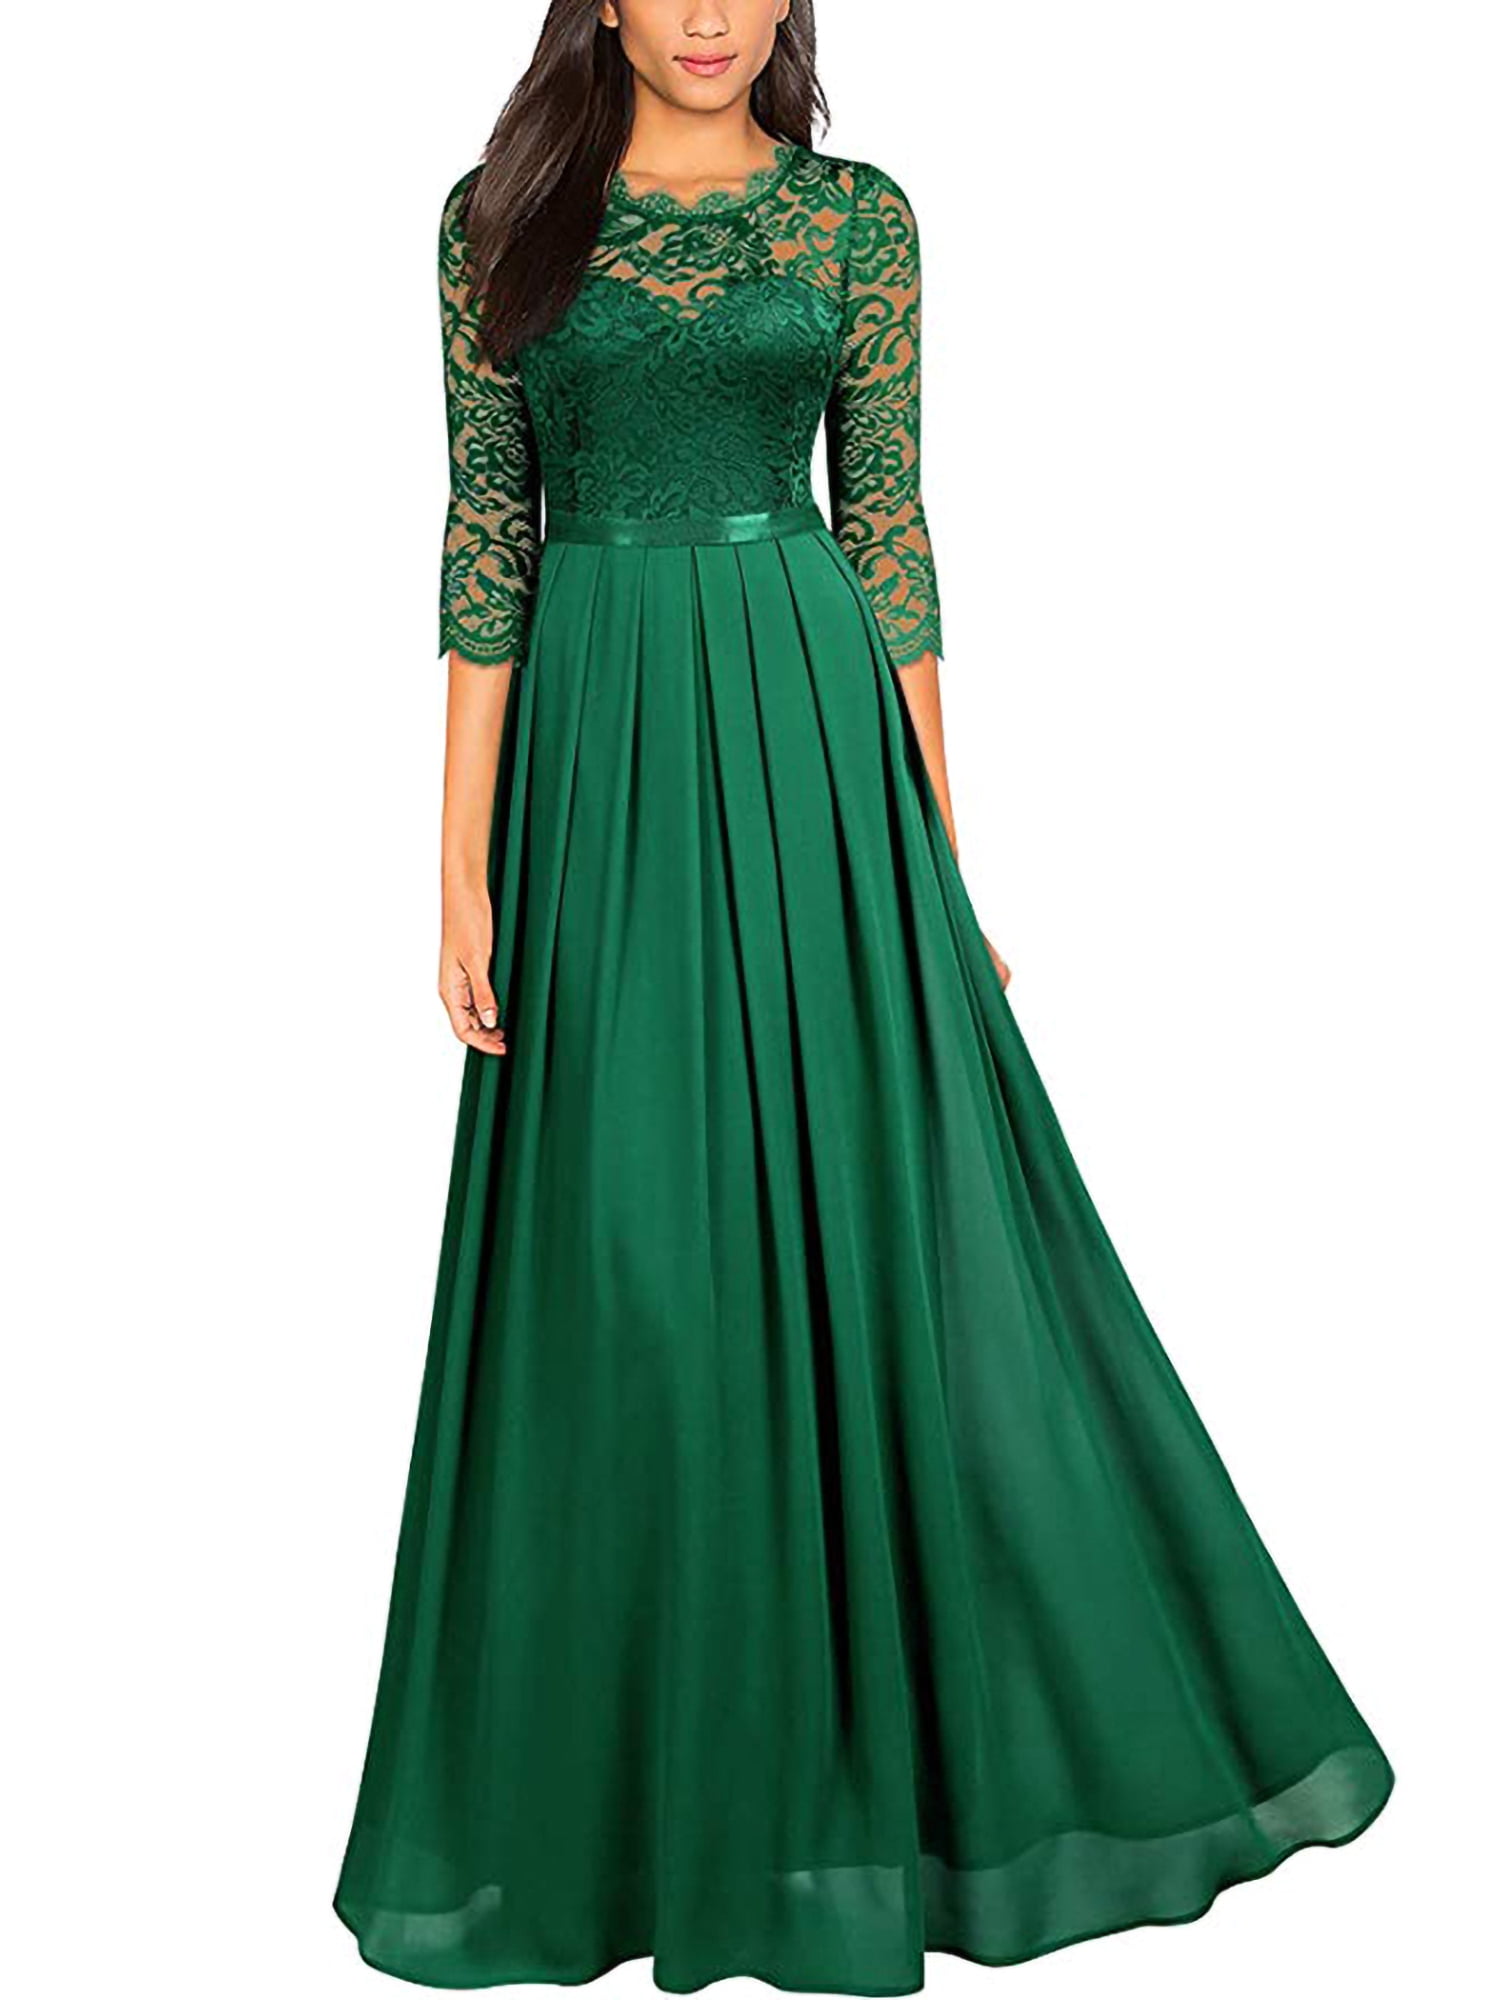 Top 50 Different Types of Party Wear Gowns